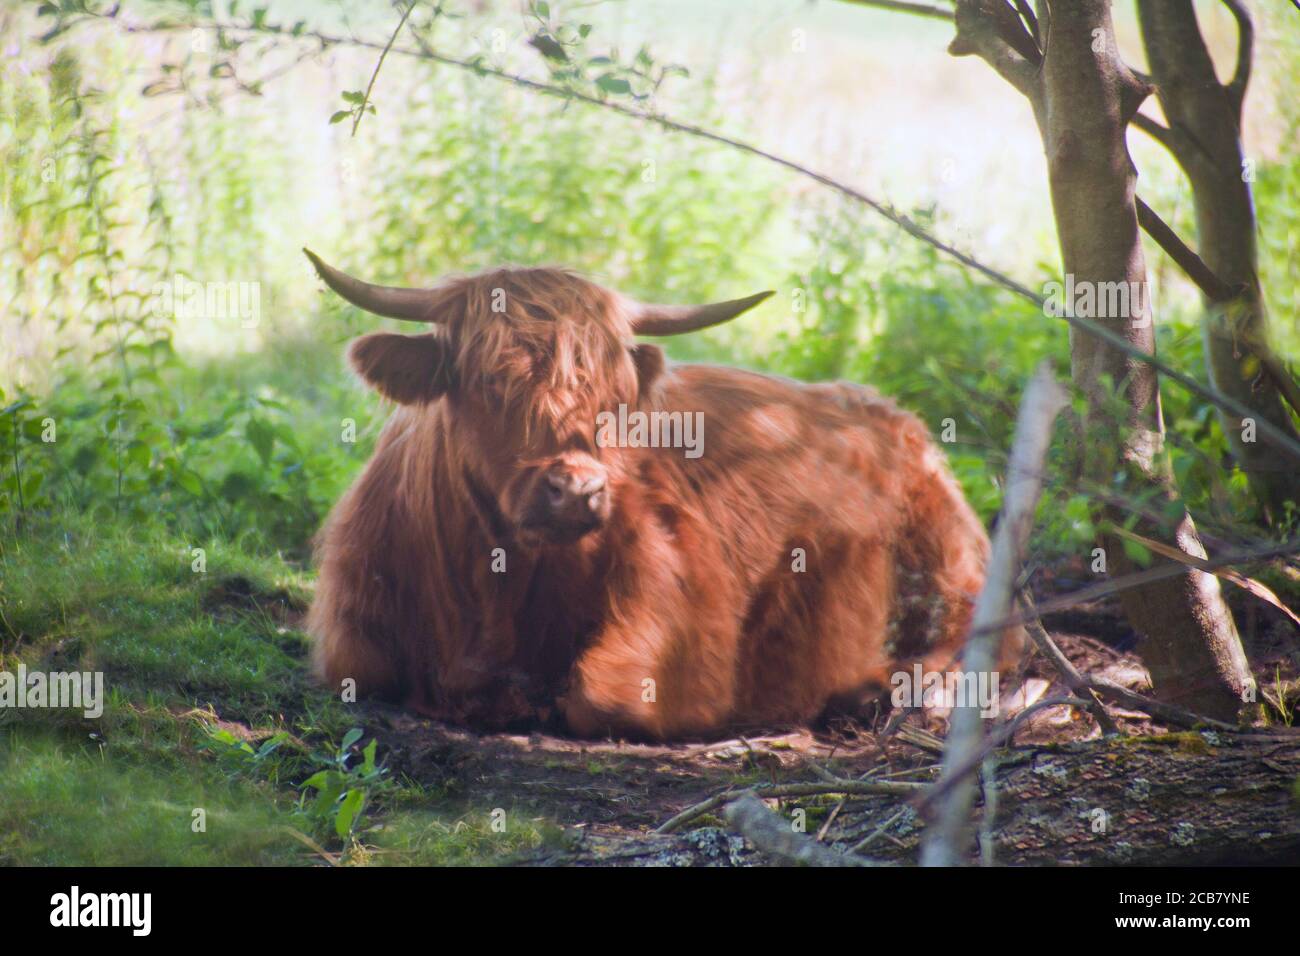 Sleeping Highland cattle. Scottish breed is a rustic cattle which has long horns and a long shaggy coat. Close up of scottish highland cow at the Stock Photo